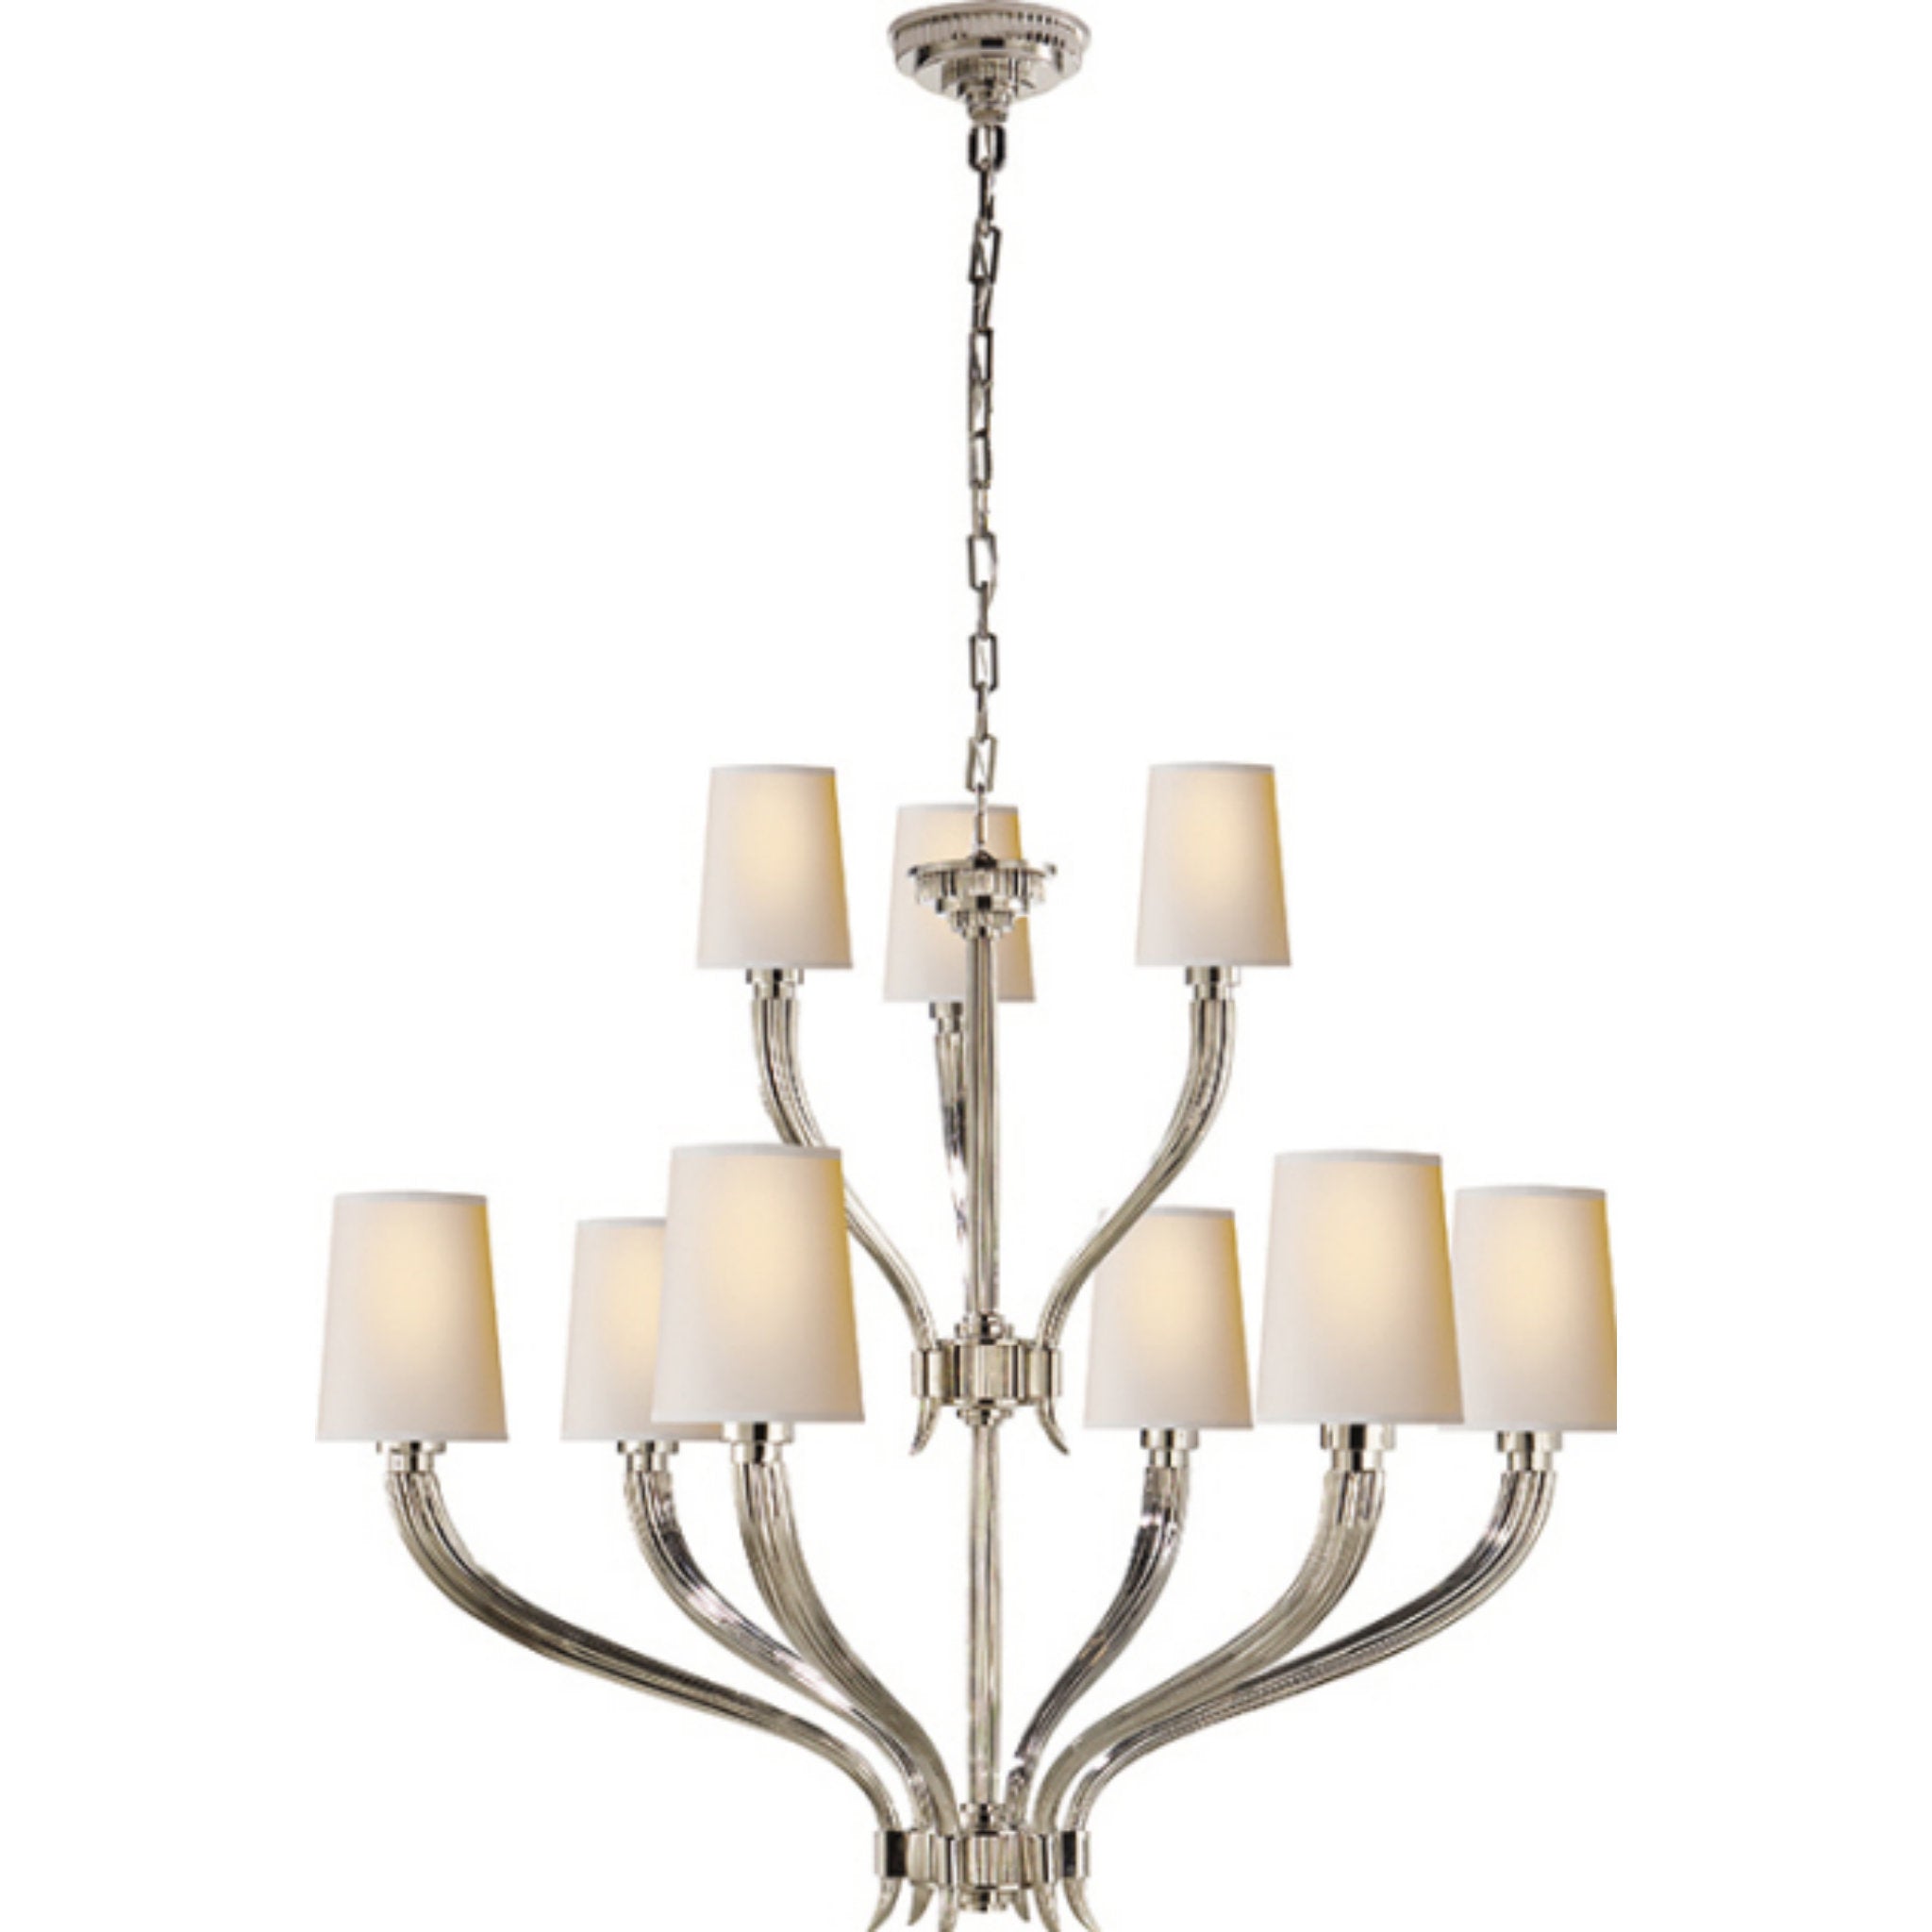 Chapman & Myers Ruhlmann 2-Tier Chandelier in Polished Nickel with Natural Paper Shades